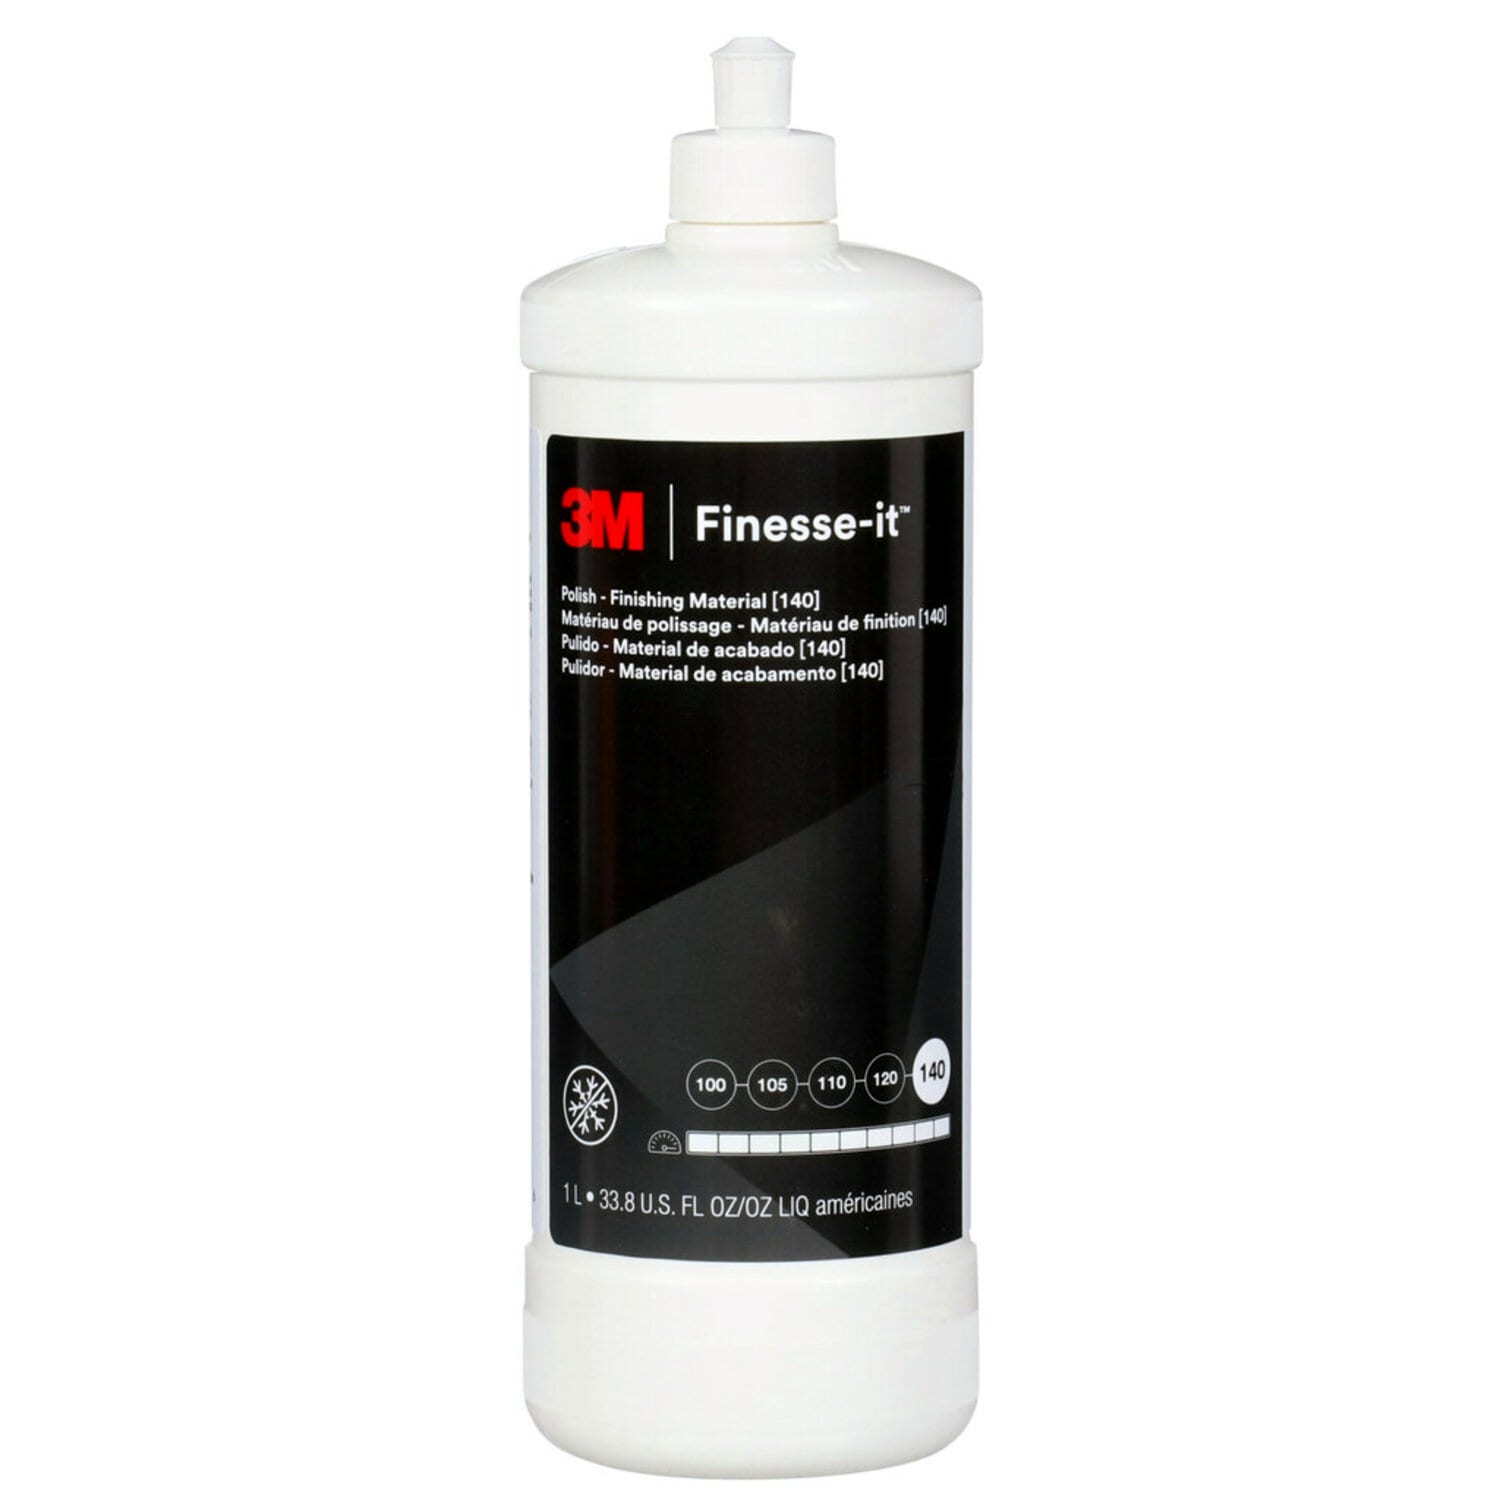 7100075518 - 3M Finesse-it Polish Standard Series - Finishing Material (140),
81235, White, Easy Clean Up, Liter (33.814 oz), 12 ea/Case